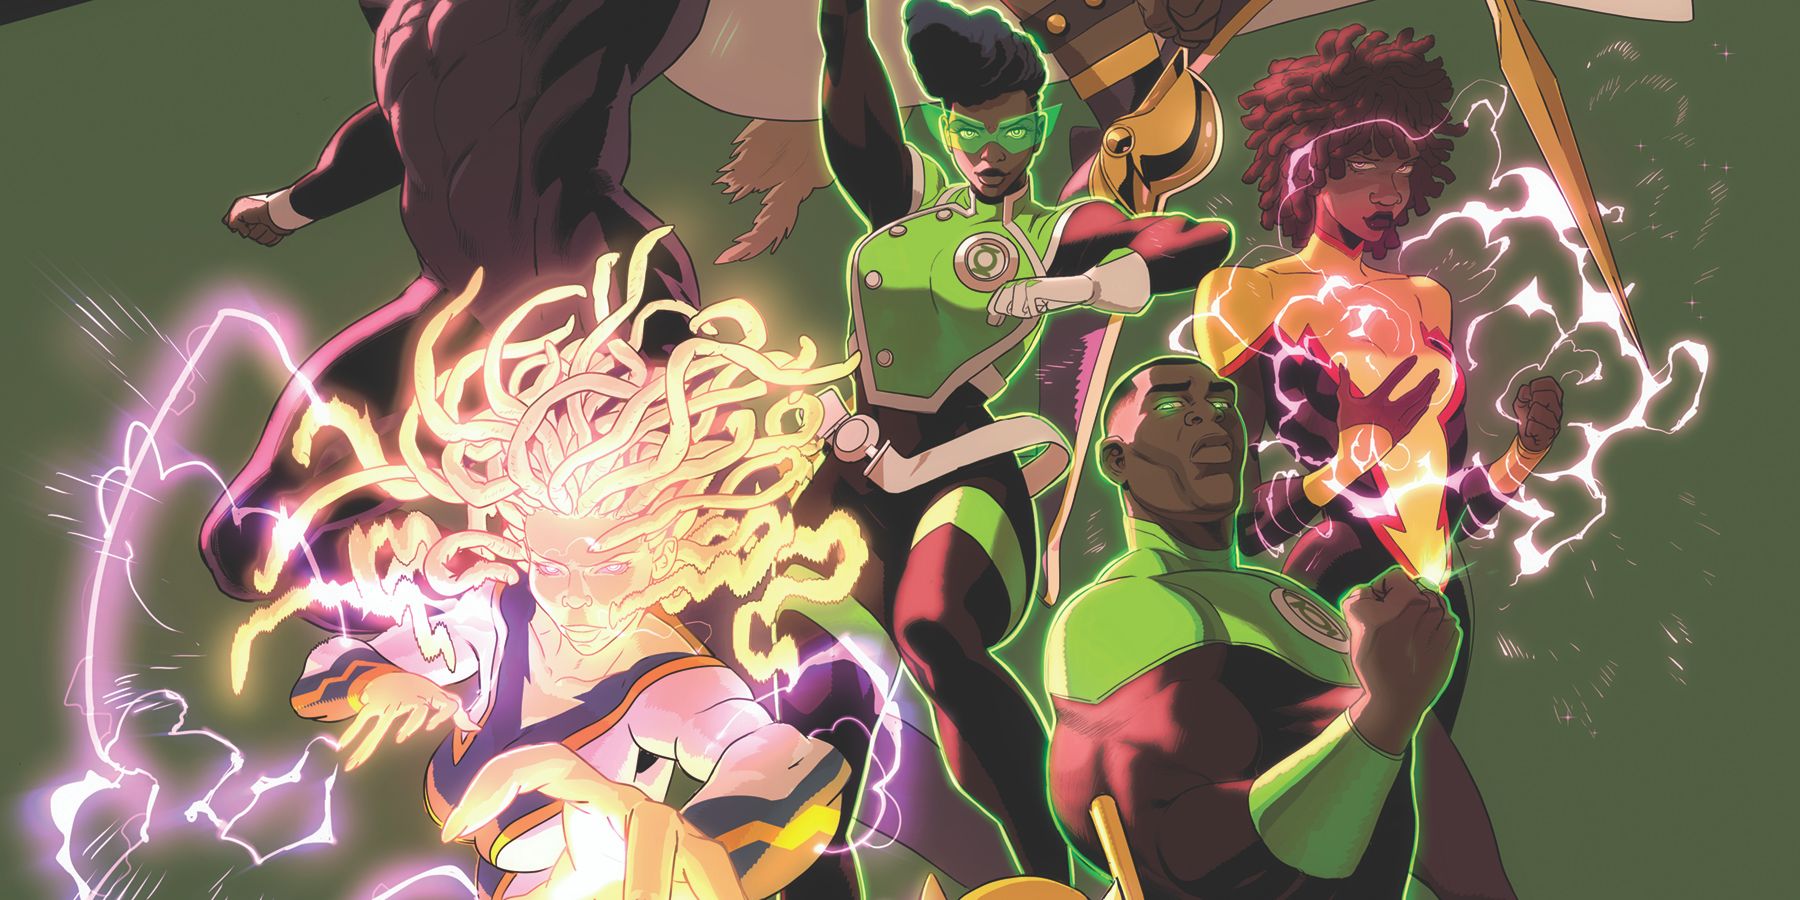 Green Lantern Writer Discusses Farewell to An Acclaimed DC Series